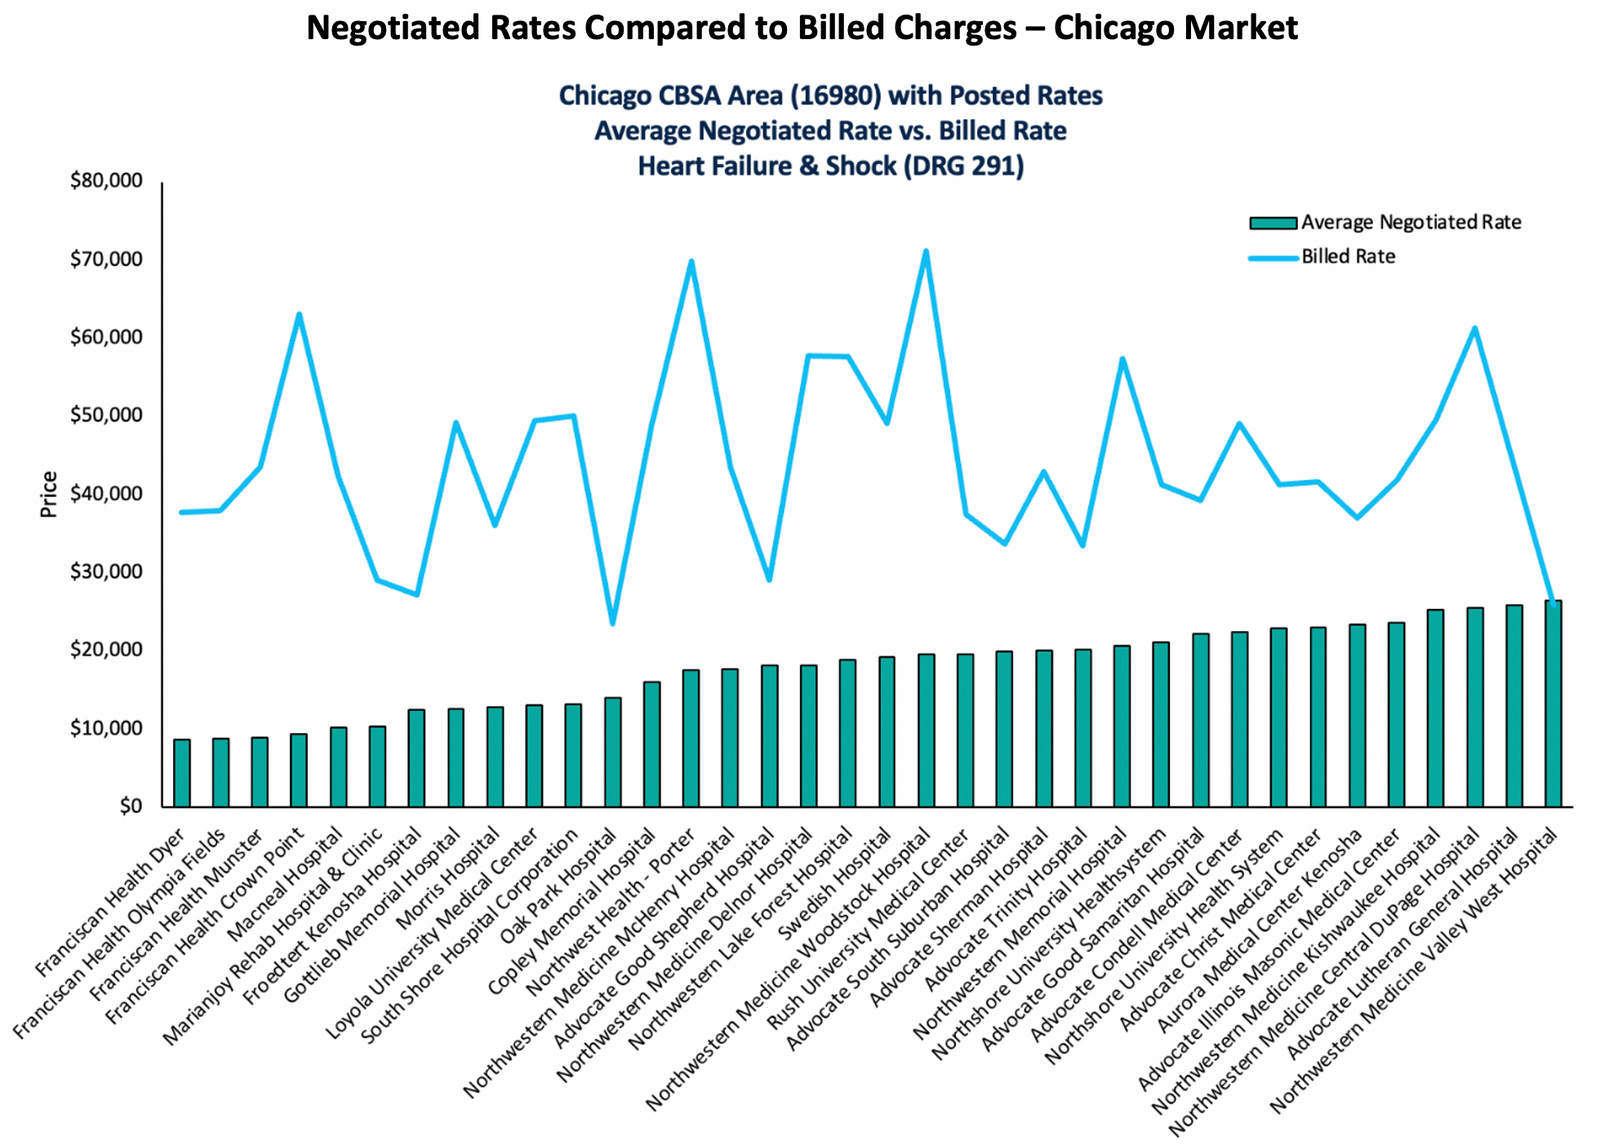 A graph showing negotiated rates in Chicago